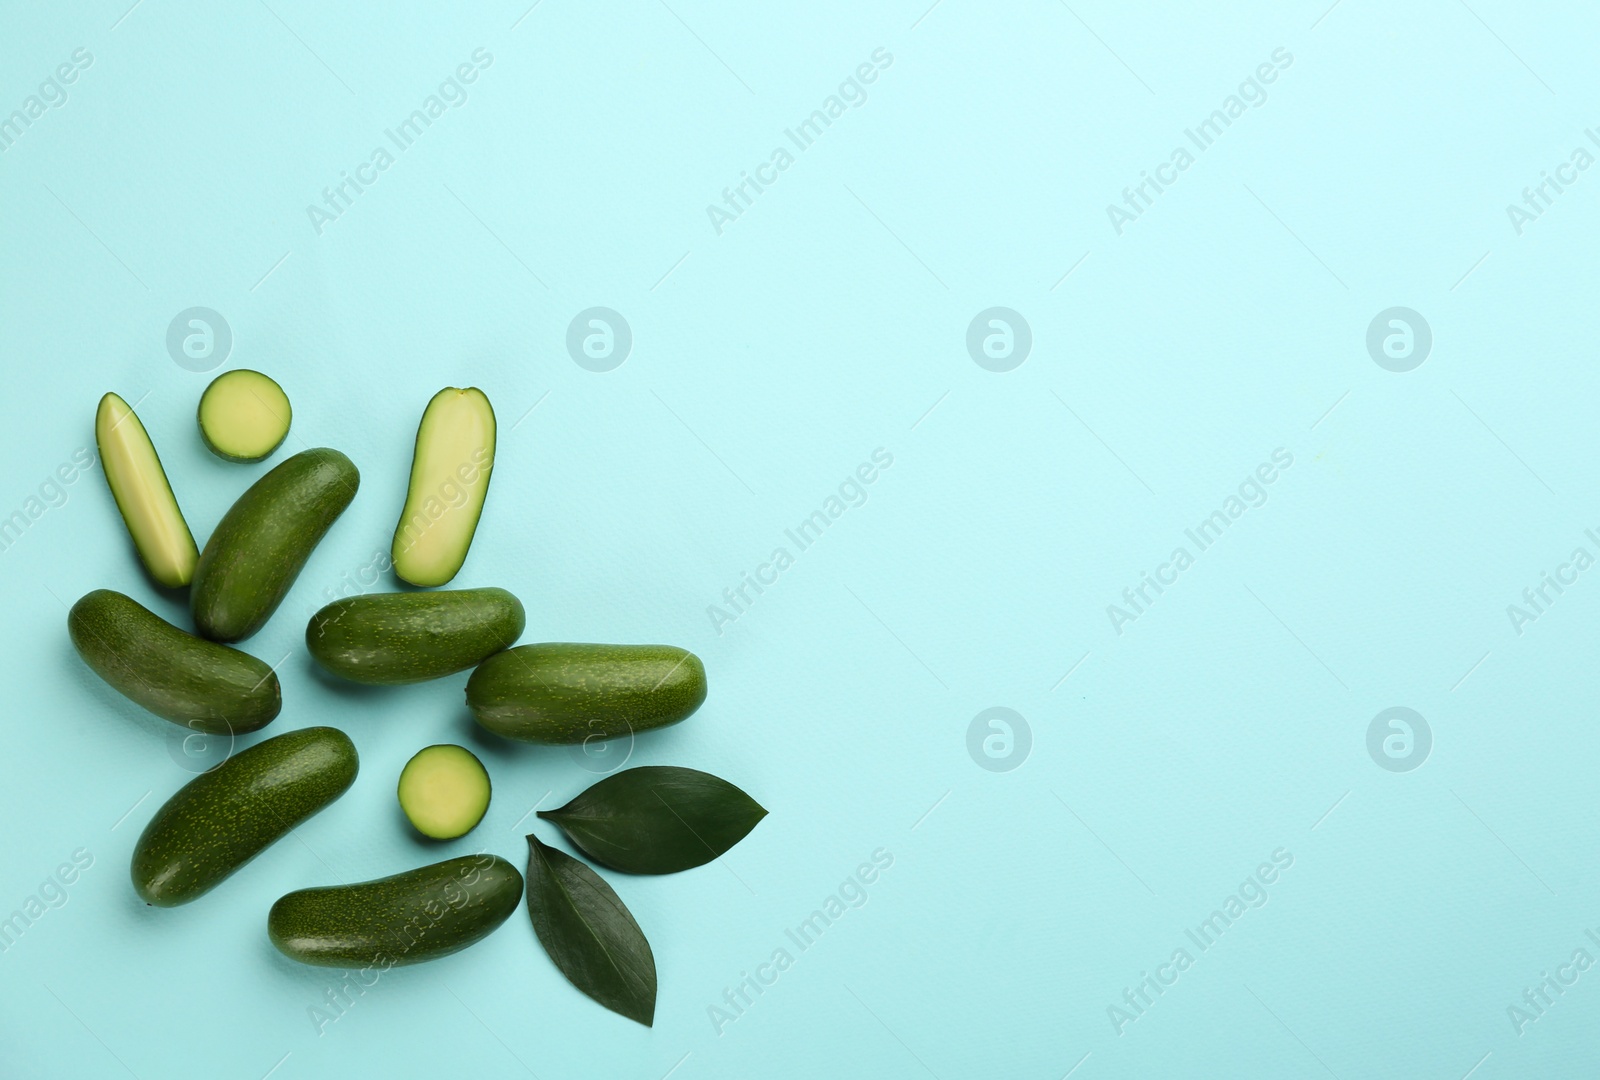 Photo of Whole and cut seedless avocados with green leaves on light blue background, flat lay. Space for text